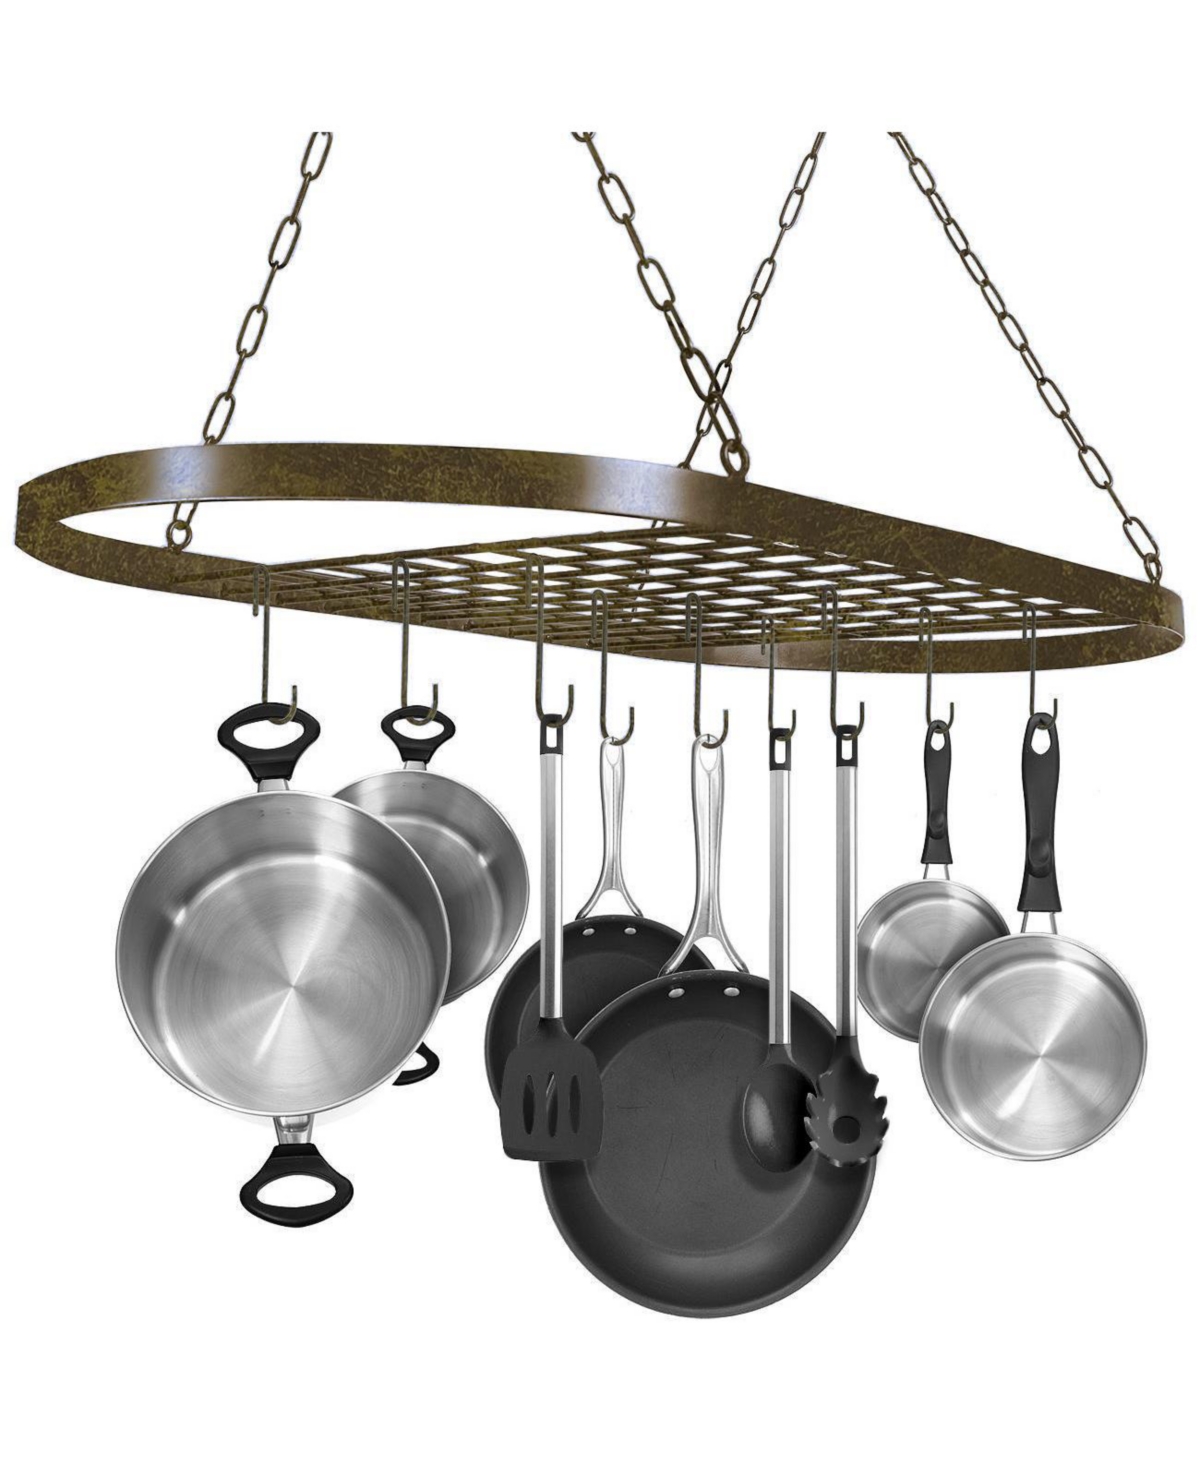 Sorbus Rustic Ceiling Mounted Pot Rack with Hooks